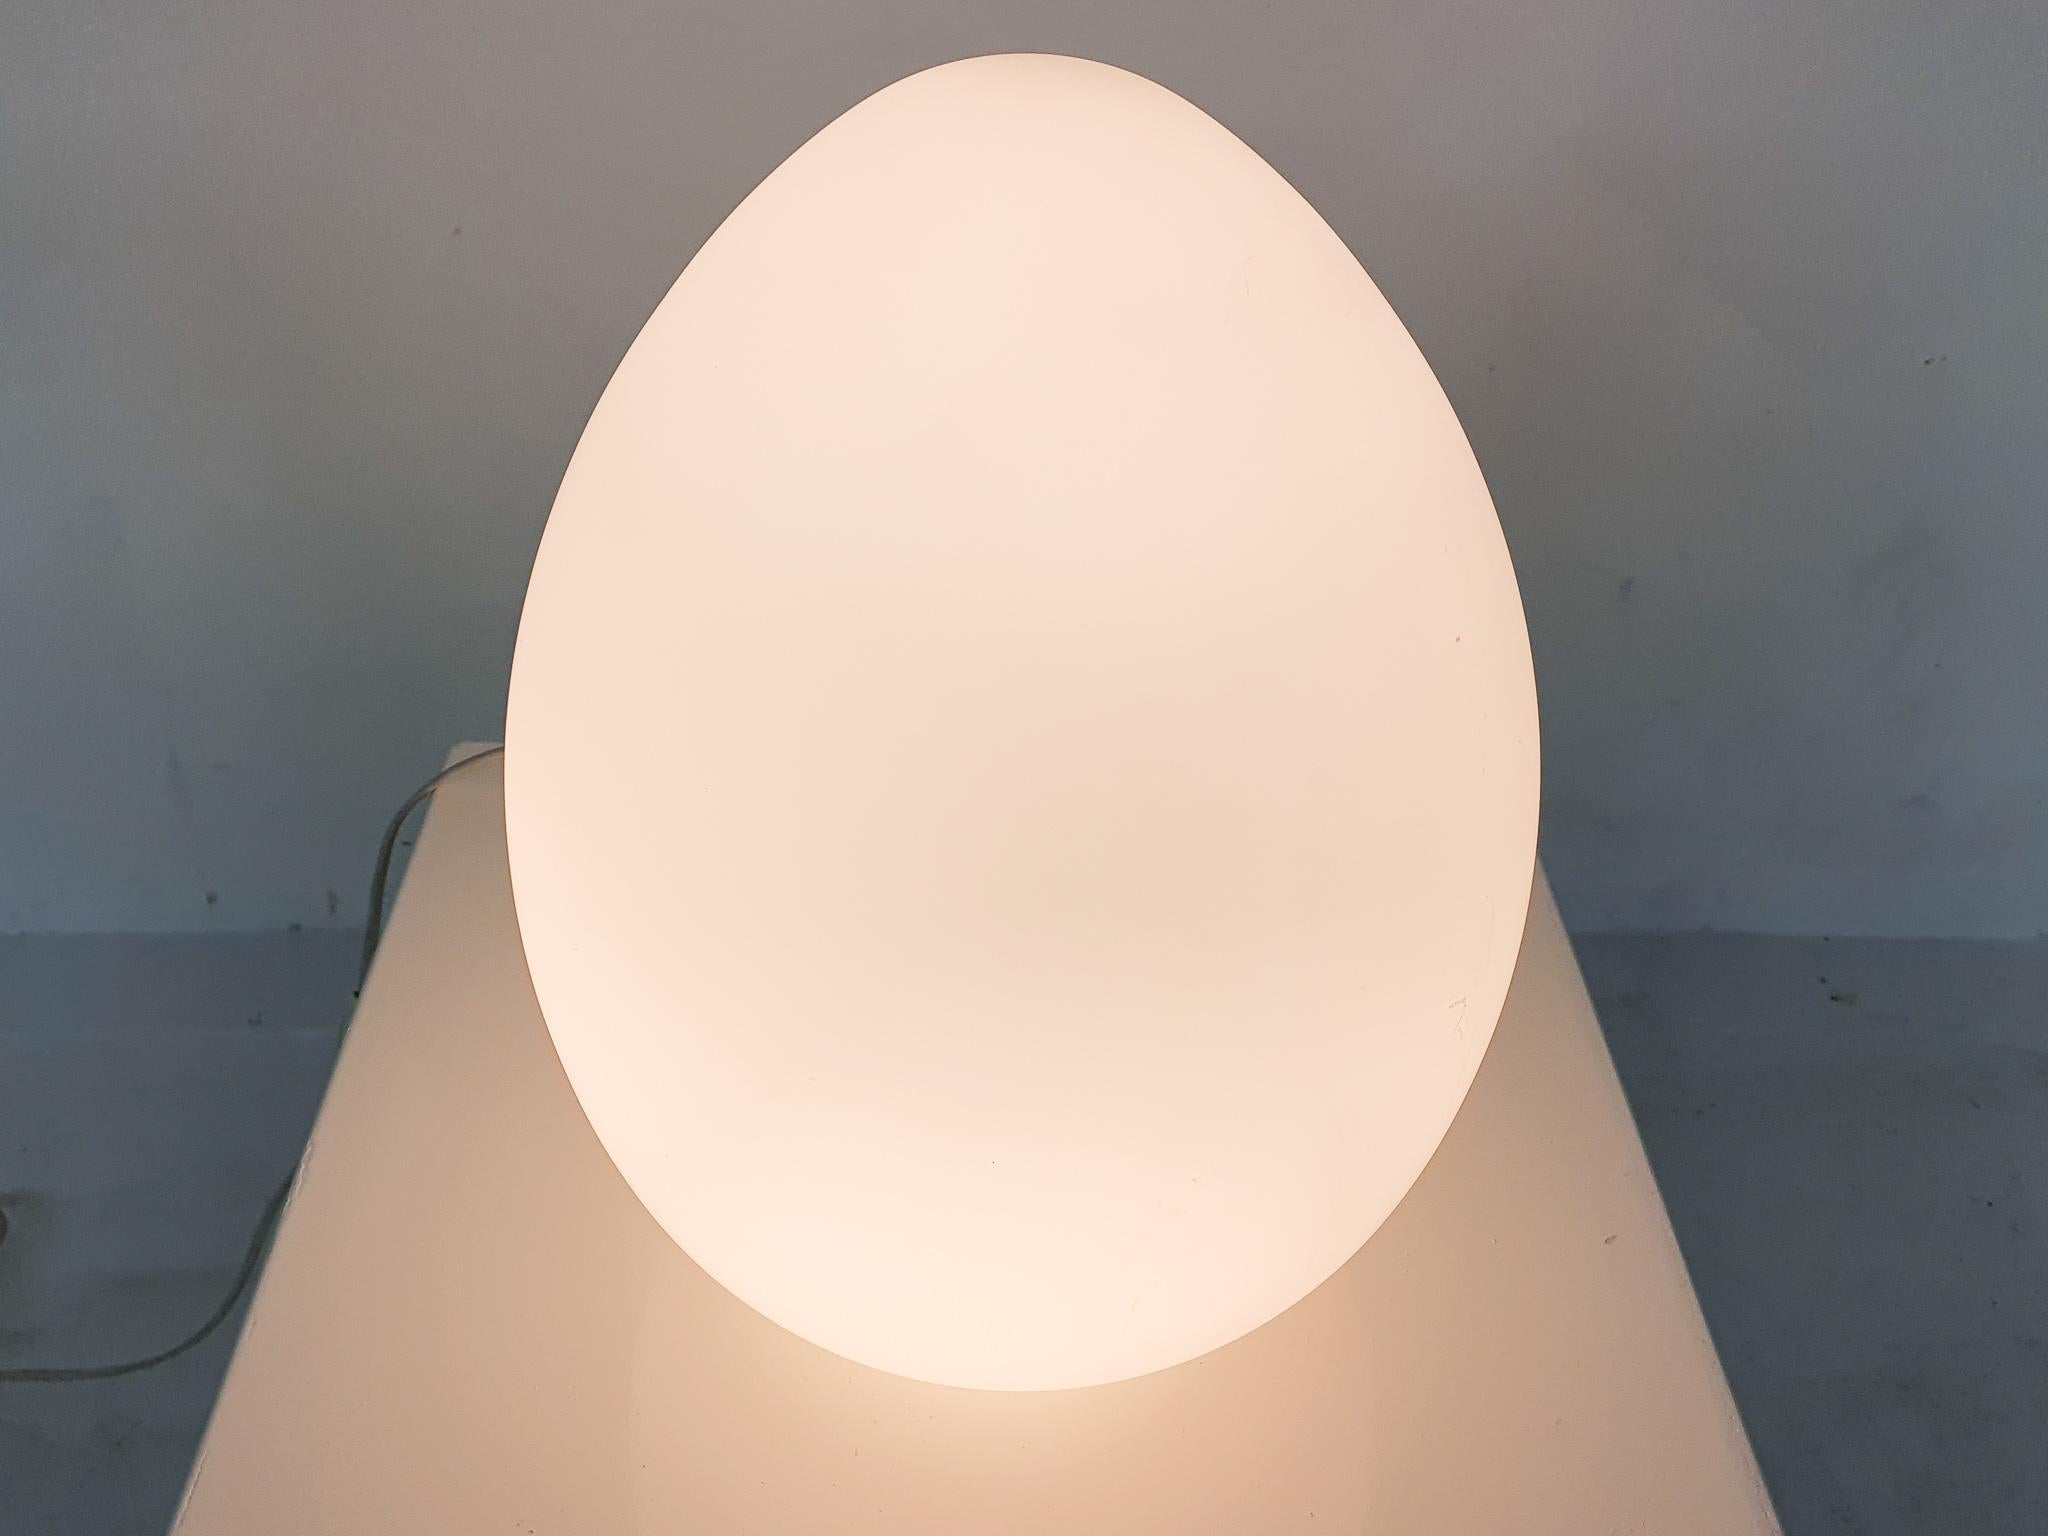 Verrerie de Vianne egg shaped table light in milk glass. In good working condition with EU plug.
In the style of Ben Swildens.